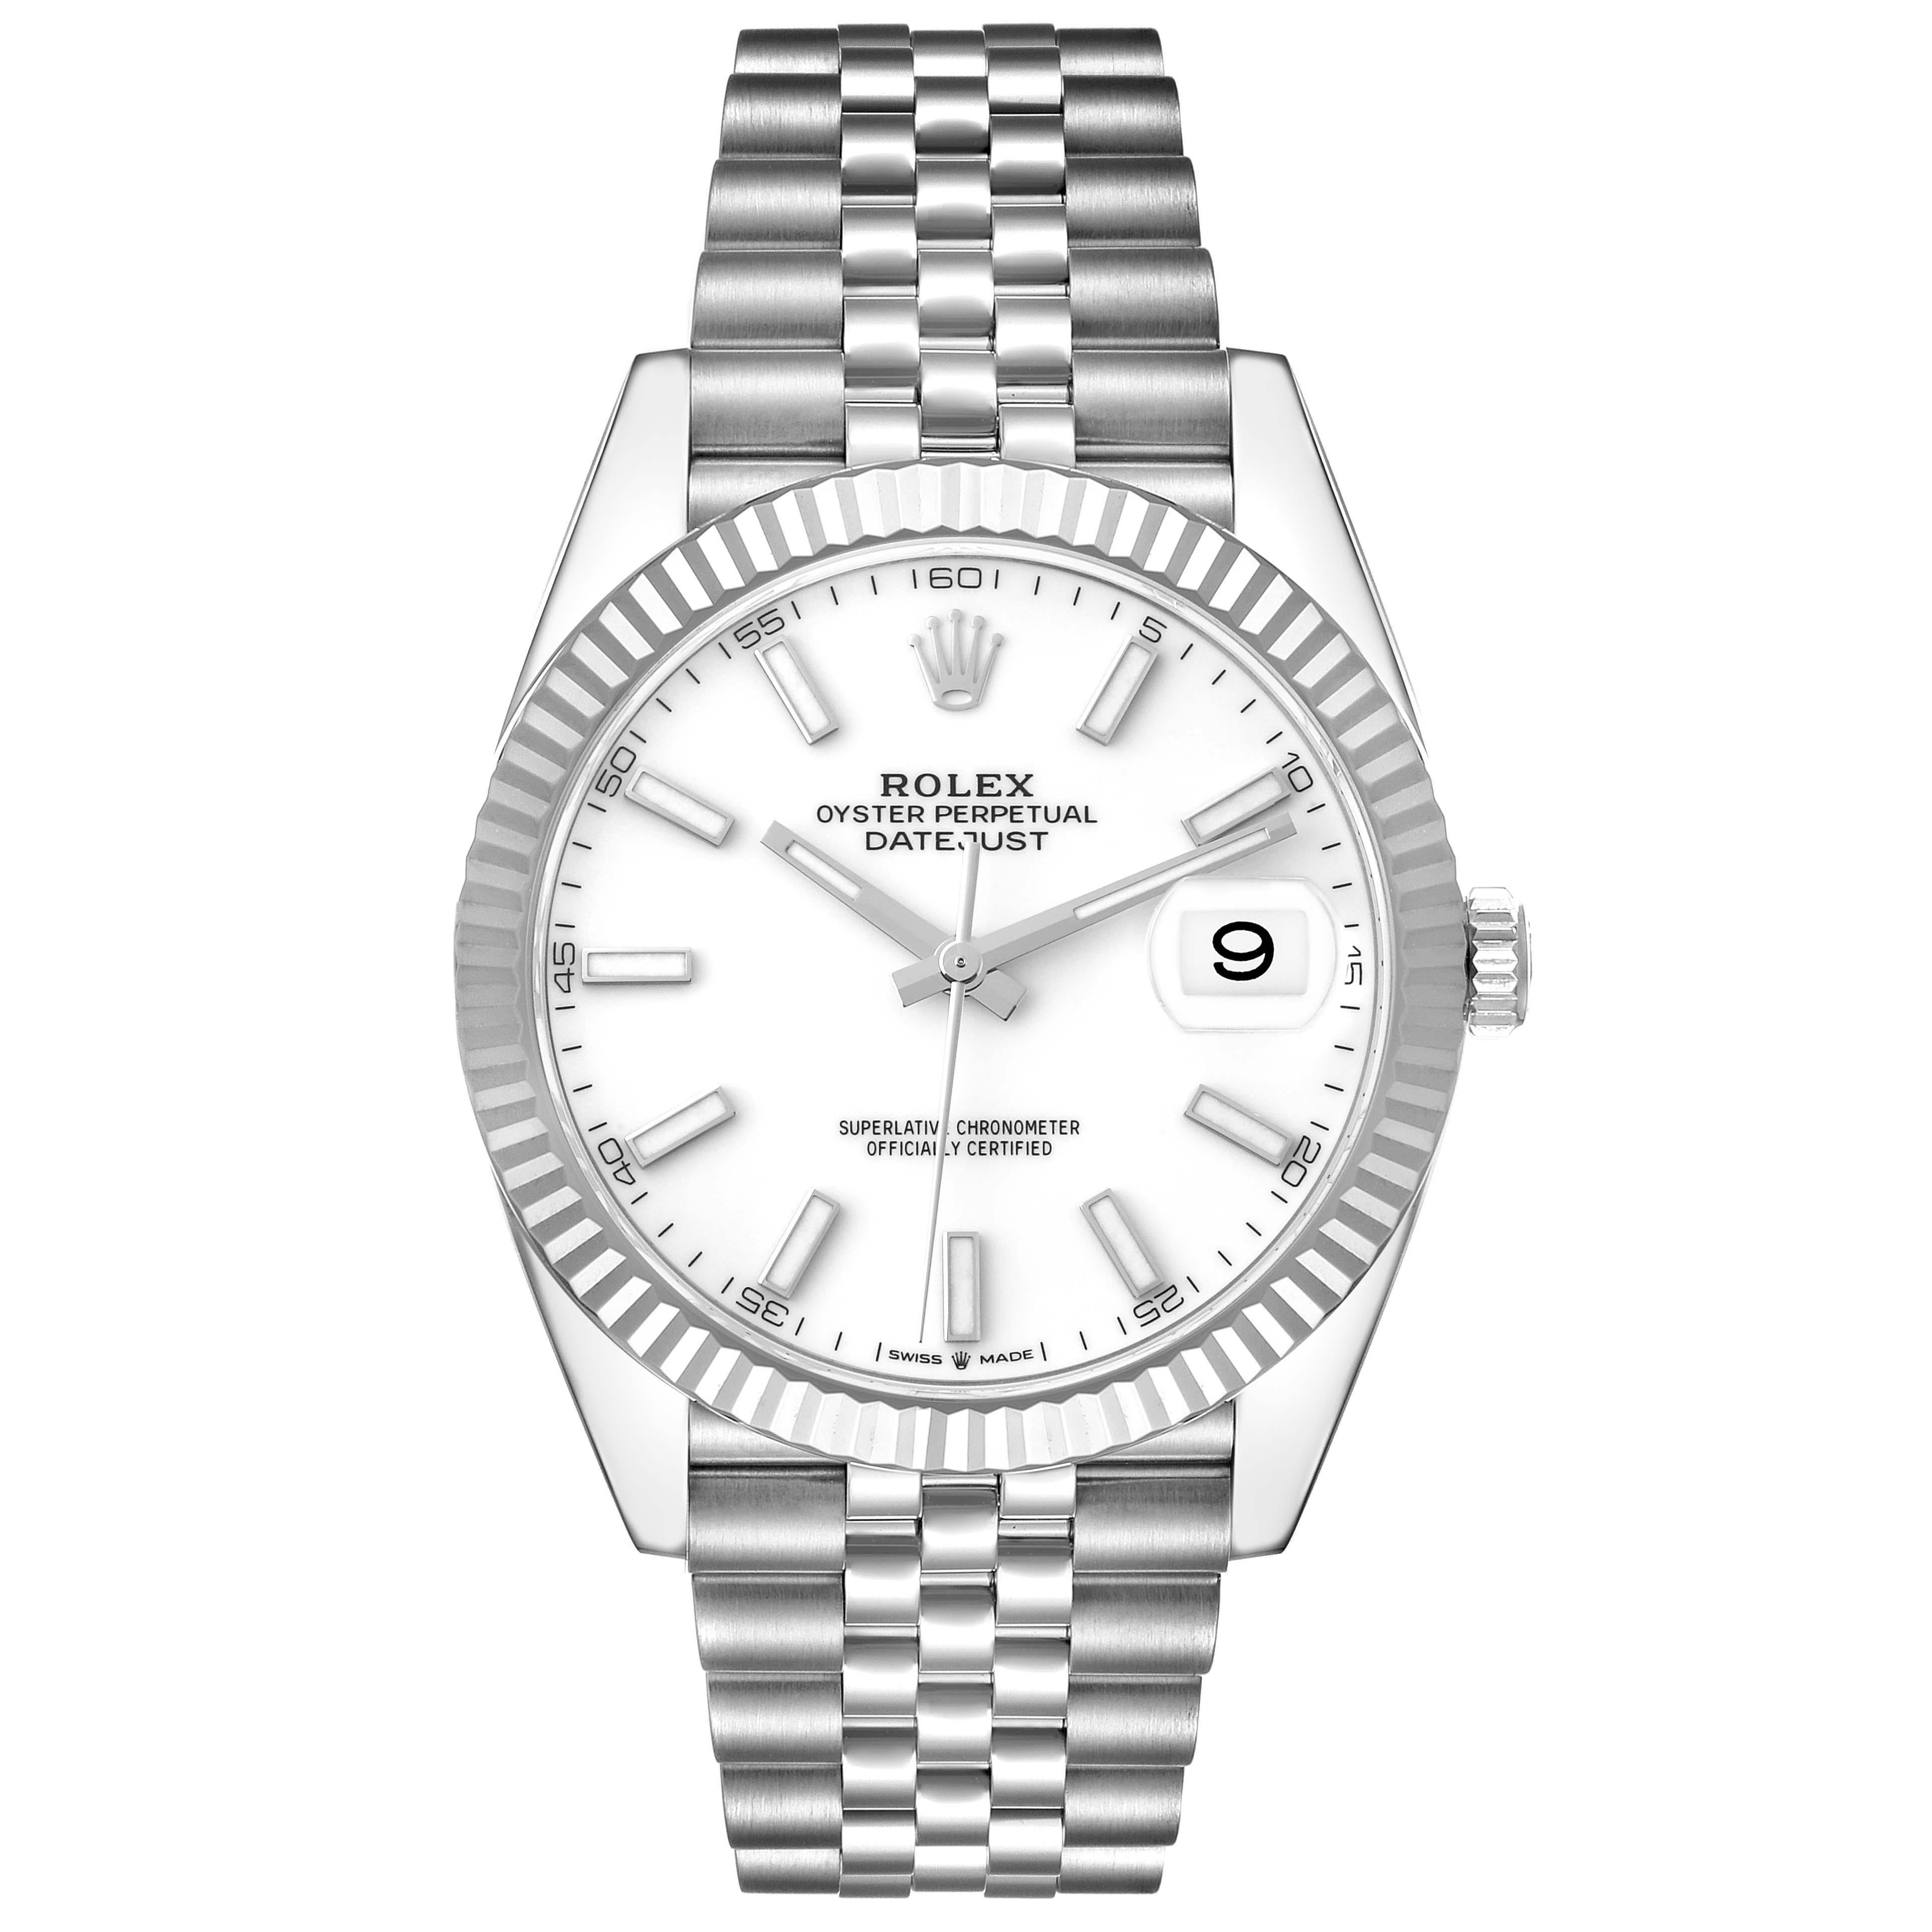 Rolex Datejust 41 White Dial Steel Mens Watch 126334 Box Card. Officially certified chronometer automatic self-winding movement. Stainless steel case 41 mm in diameter. Rolex logo on the crown. 18K white gold fluted bezel. Scratch resistant sapphire